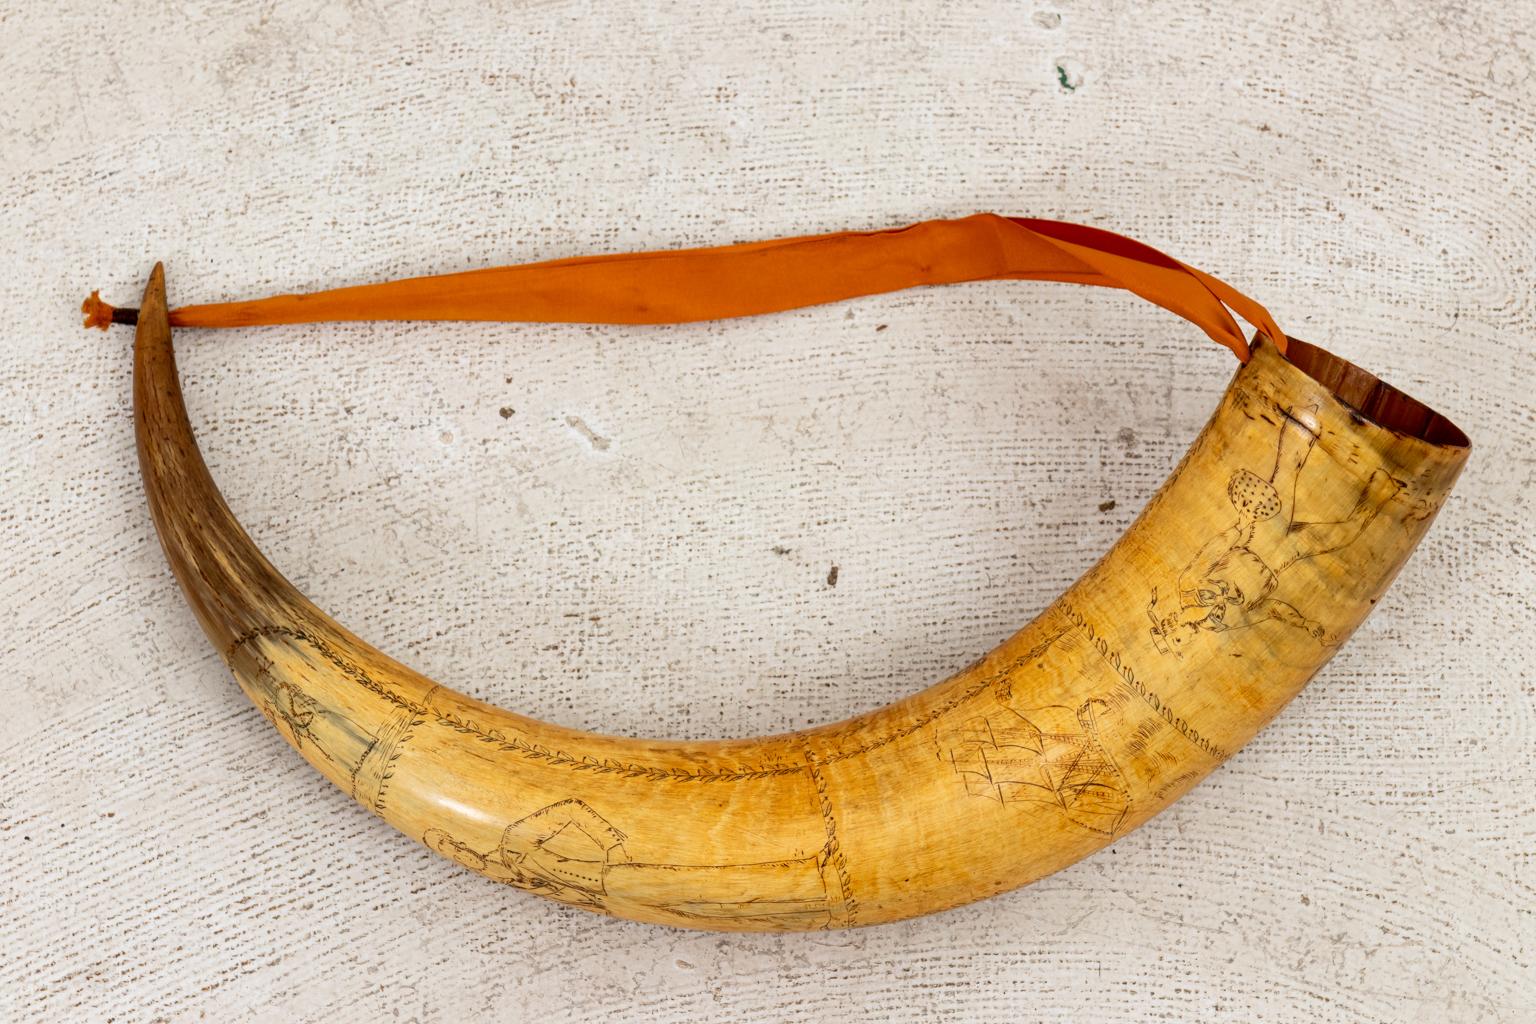 Gun powder horn composed of cow horn scrimshawed with motifs such as Scottish highlanders, ships, female figures, and floral trim, circa 1800s-1830s. Made in Scotland. Please note of wear consistent with age including minor finish loss.